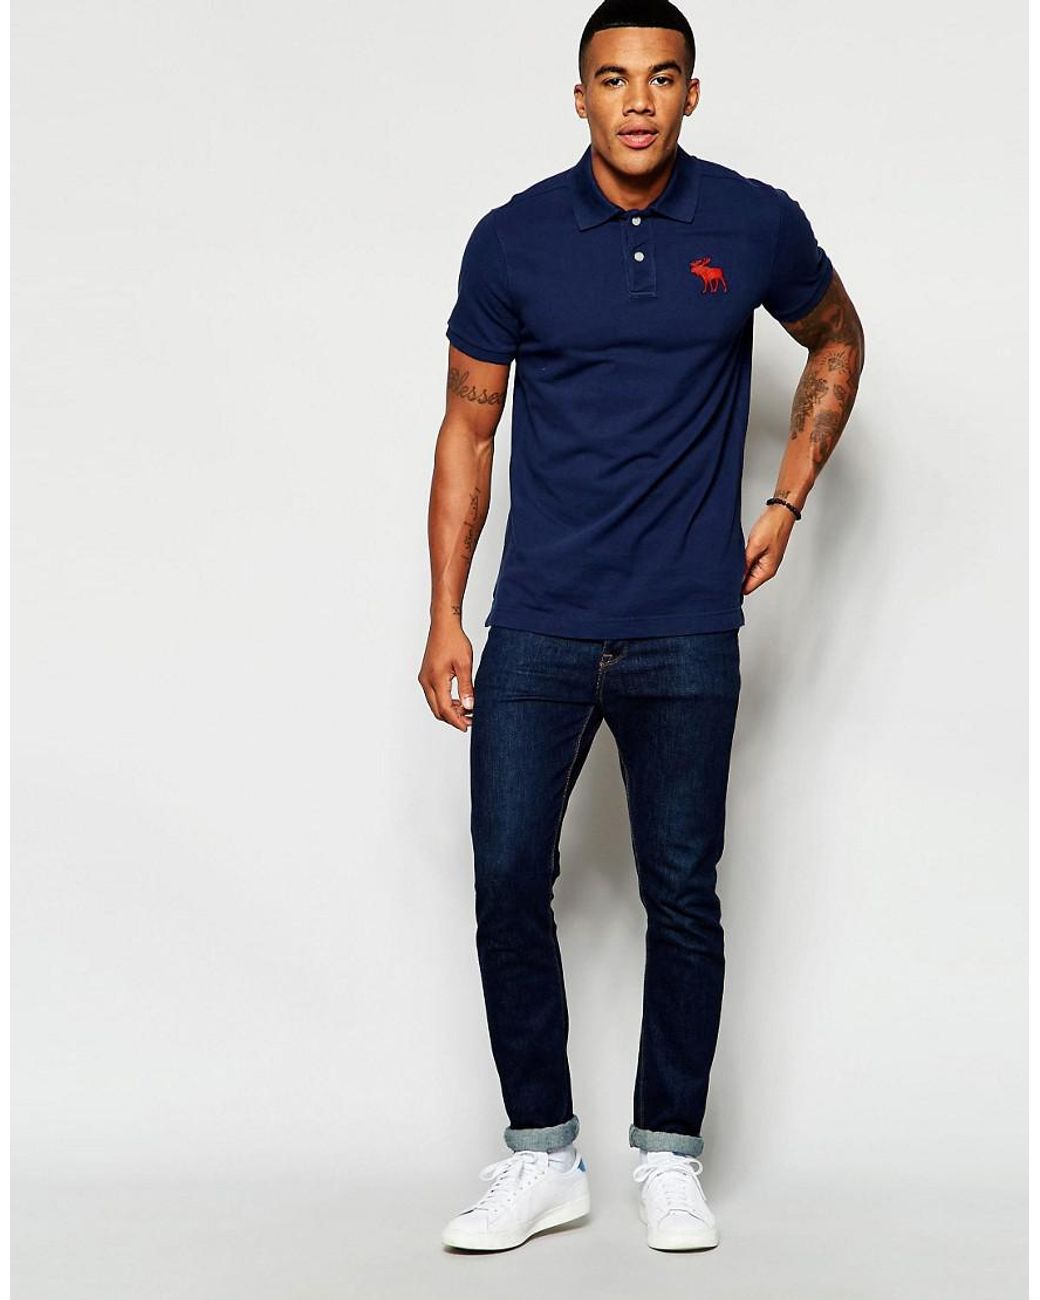 Abercrombie & Fitch Men's Blue Bercrombie & Fitch Polo Shirt In Muscle Slim  Fit With Large Moose Embroidery In Navy